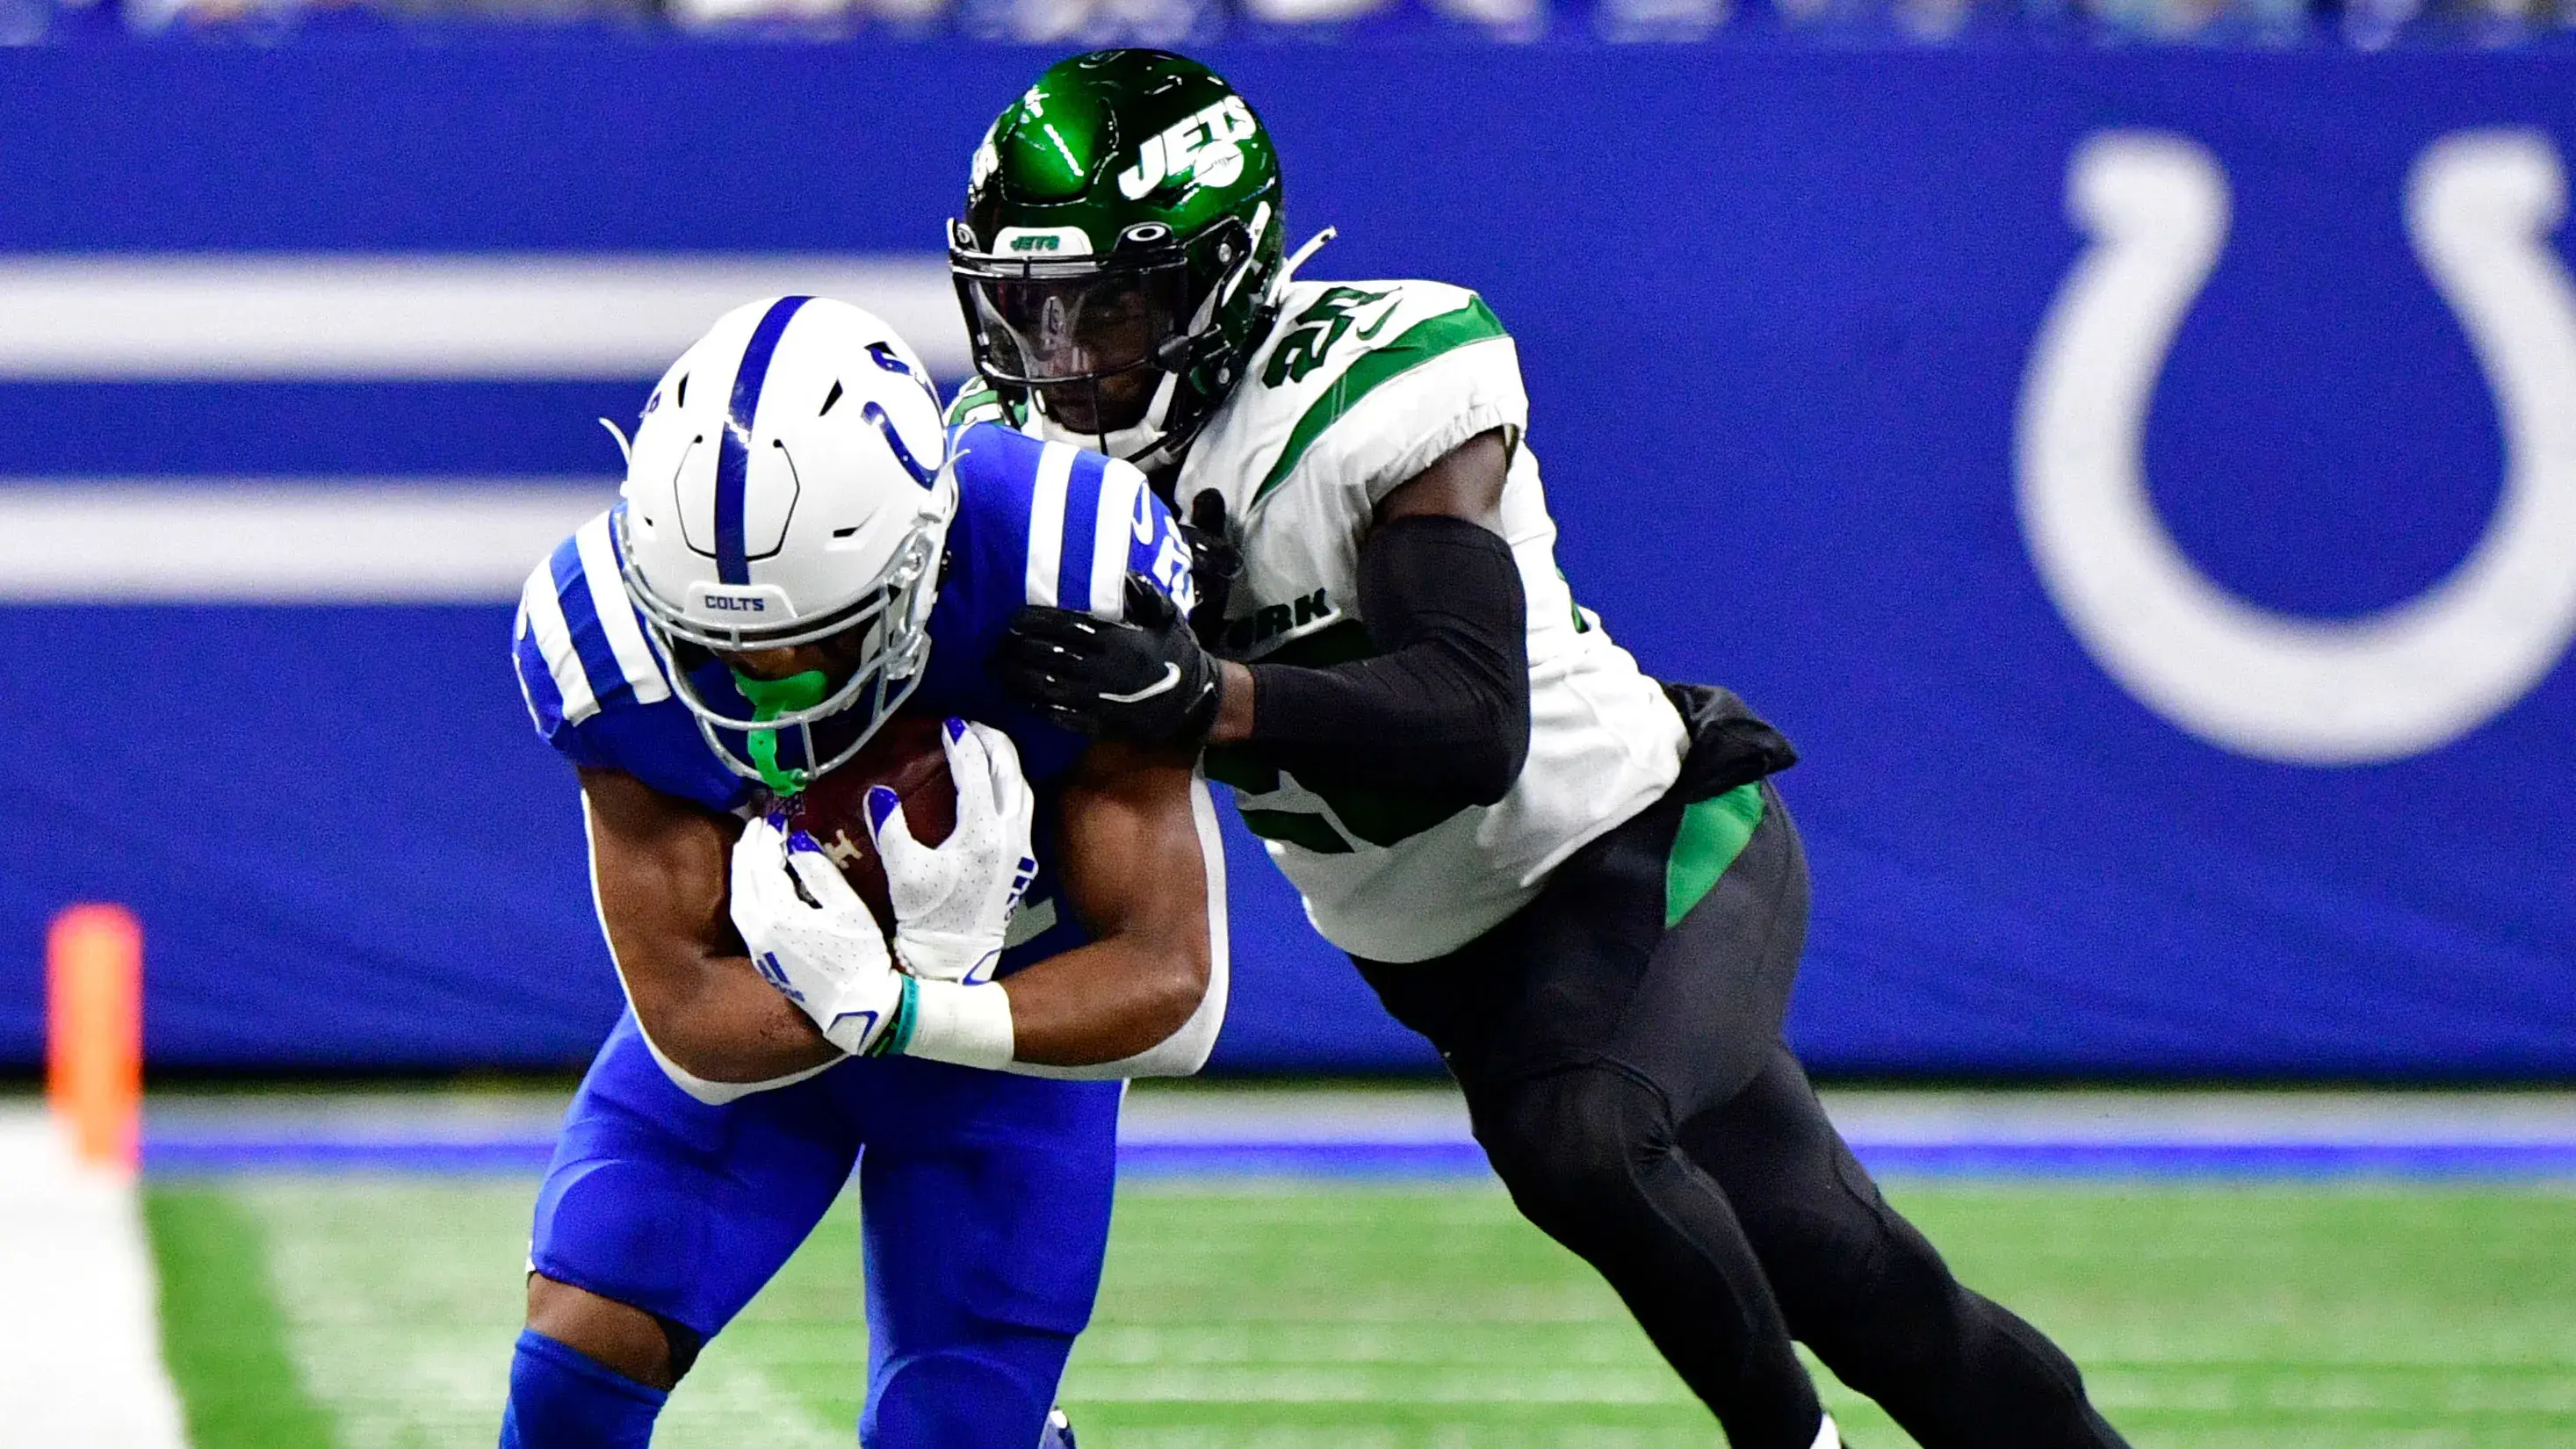 Nov 4, 2021; Indianapolis, Indiana, USA; Indianapolis Colts running back Nyheim Hines (21) is pushed out of bounds by New York Jets free safety Marcus Maye (20) during the first quarter at Lucas Oil Stadium. / Marc Lebryk-USA TODAY Sports